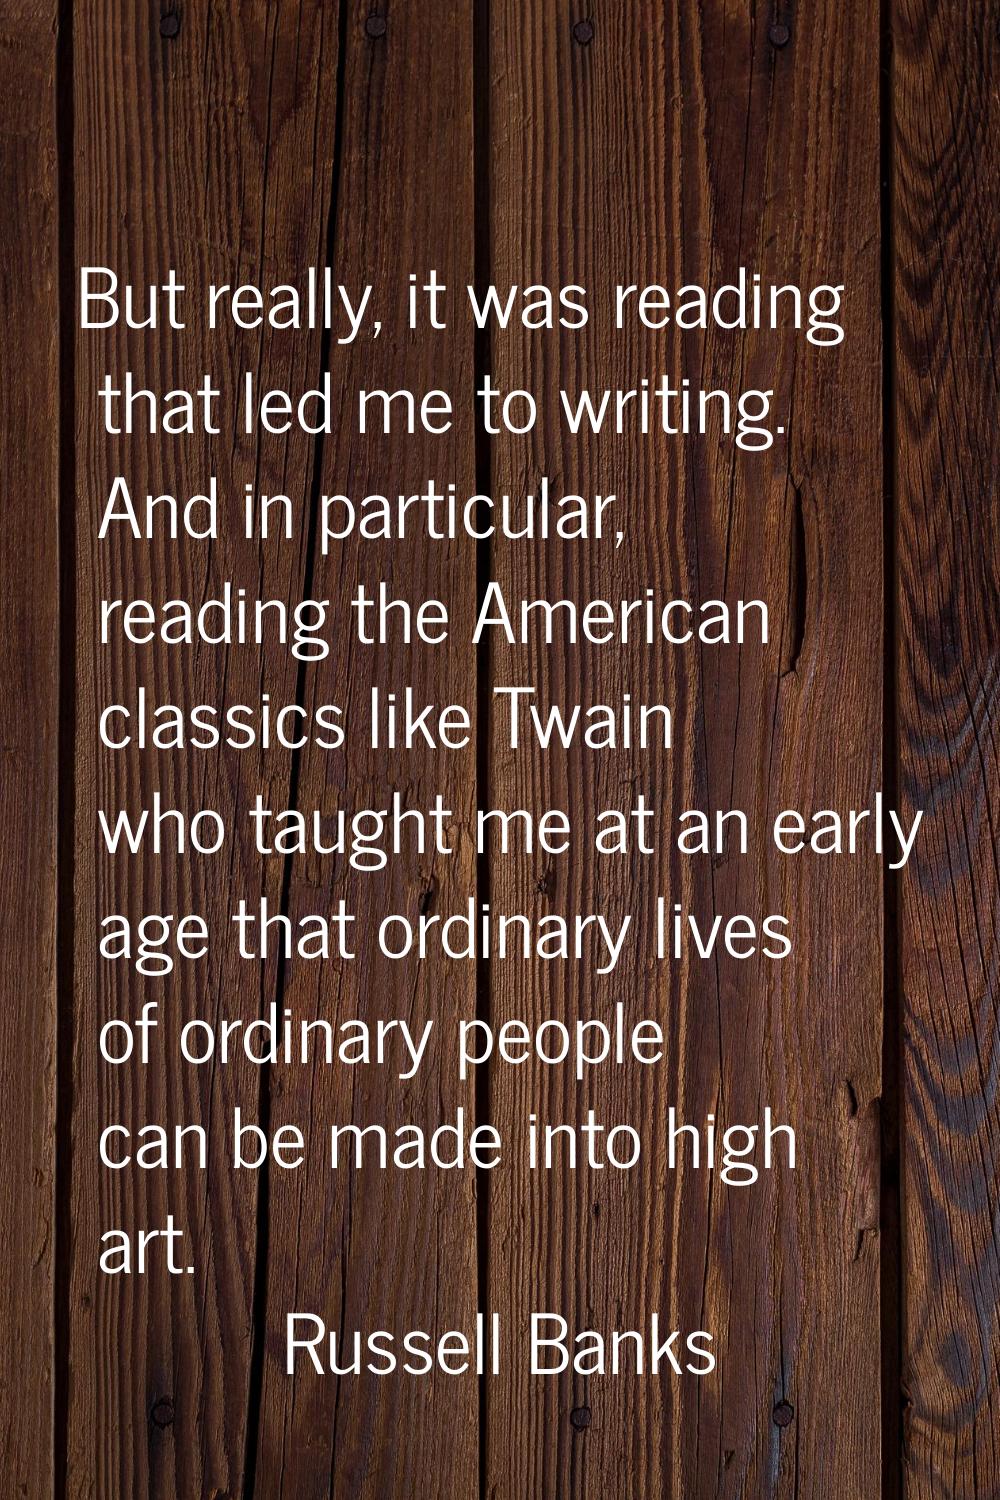 But really, it was reading that led me to writing. And in particular, reading the American classics